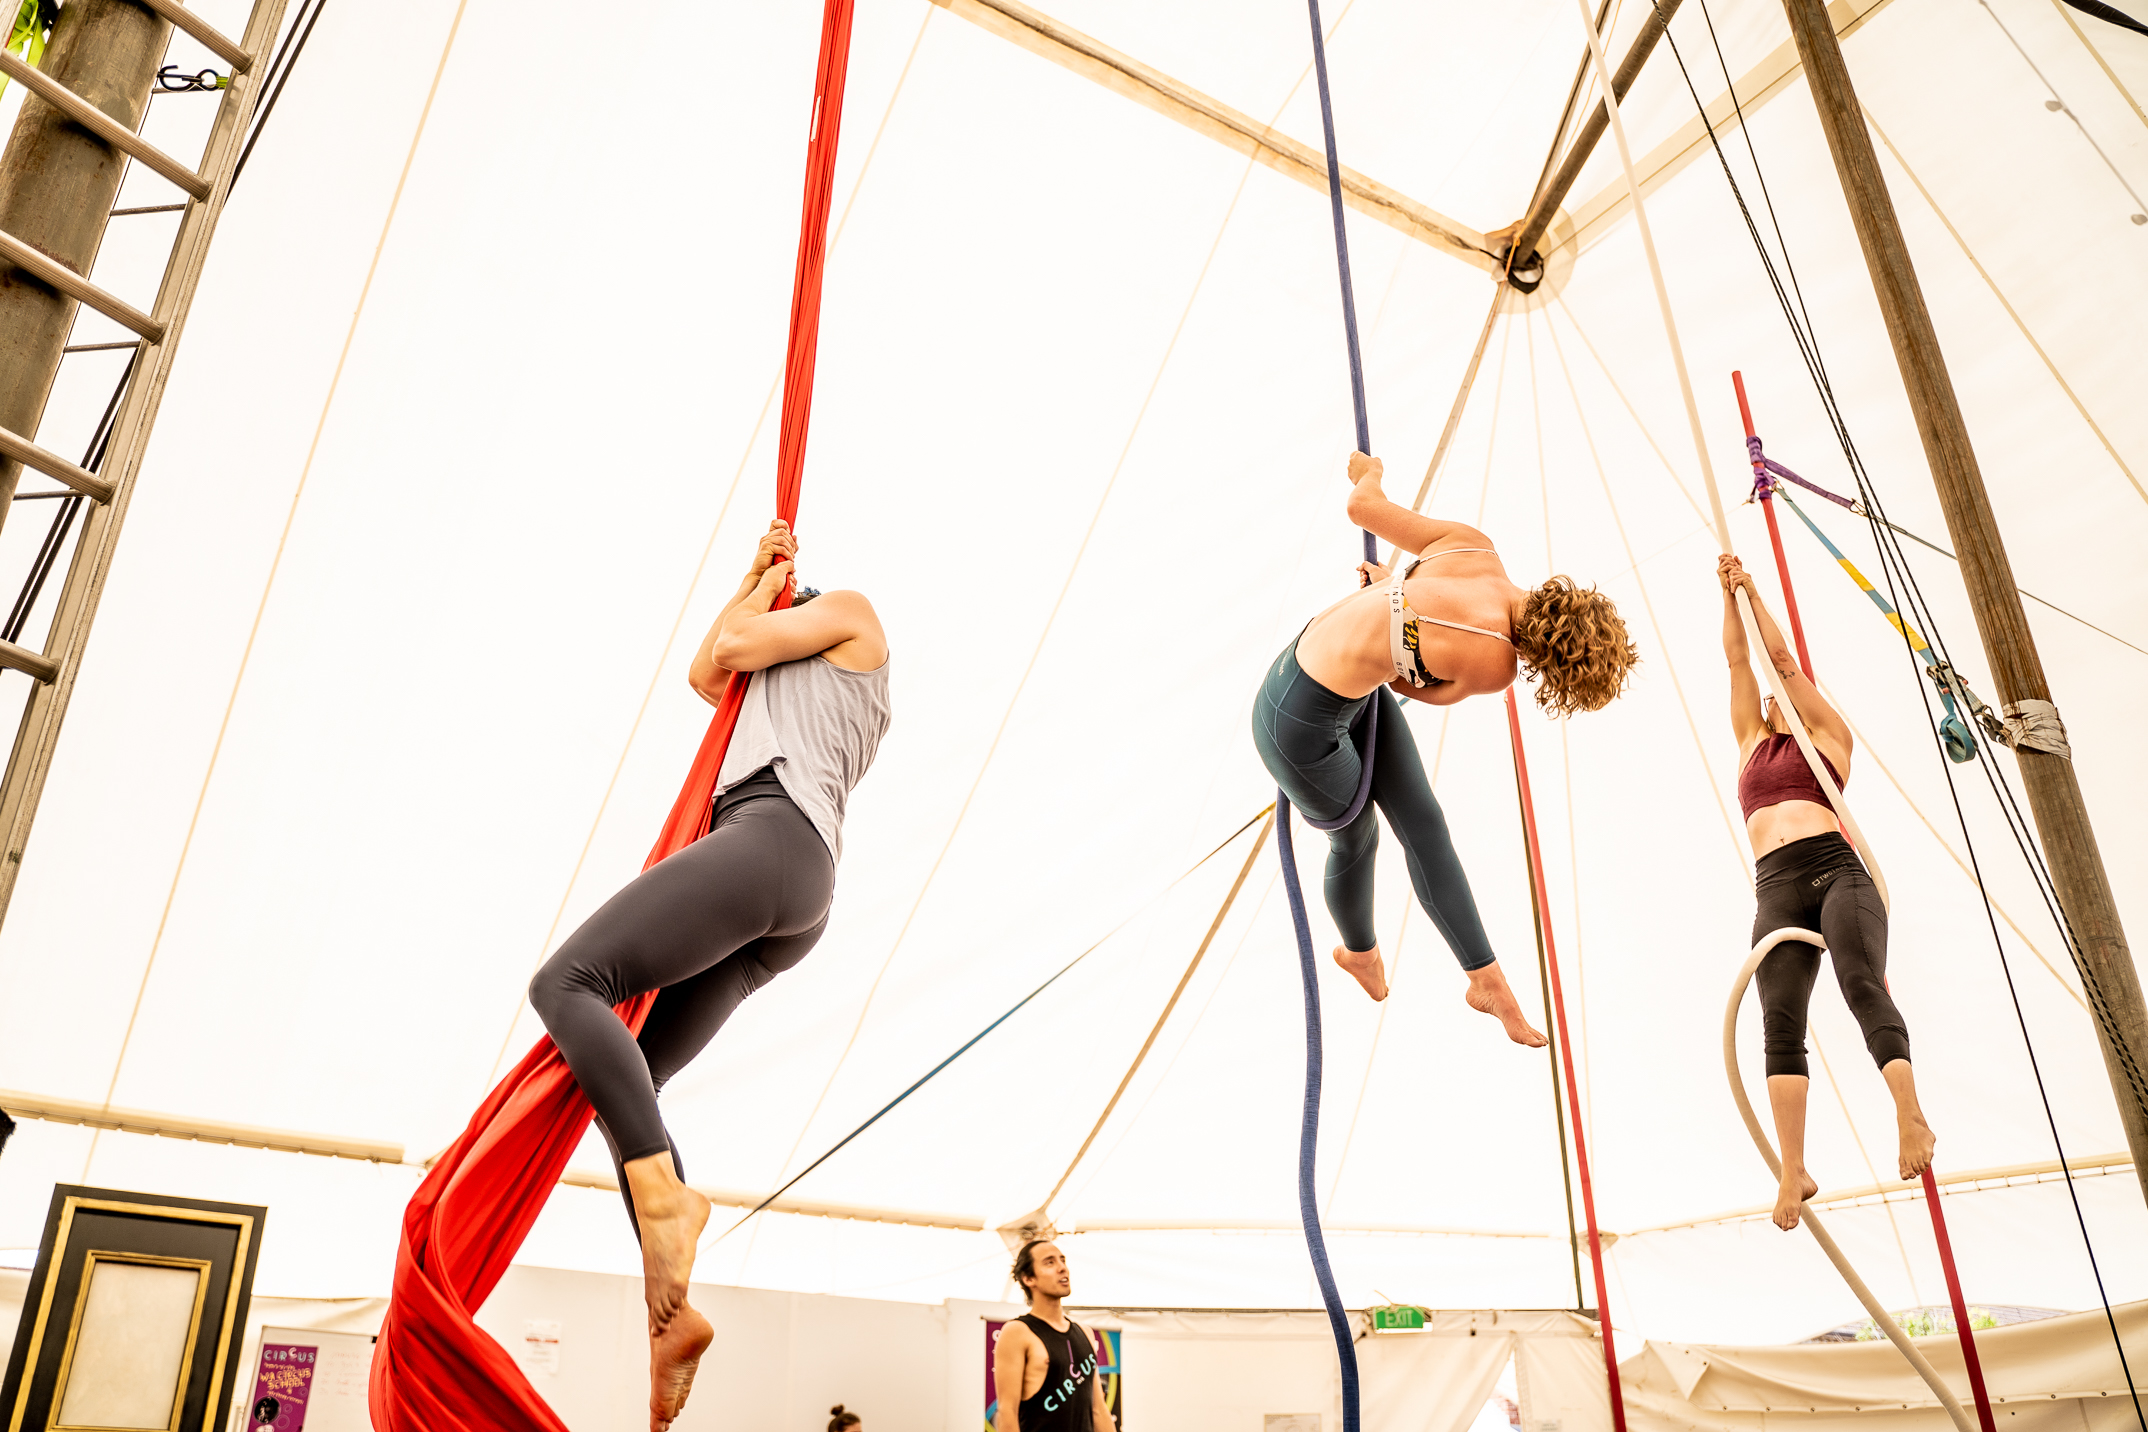 3 people do trick on aerial rope and silks